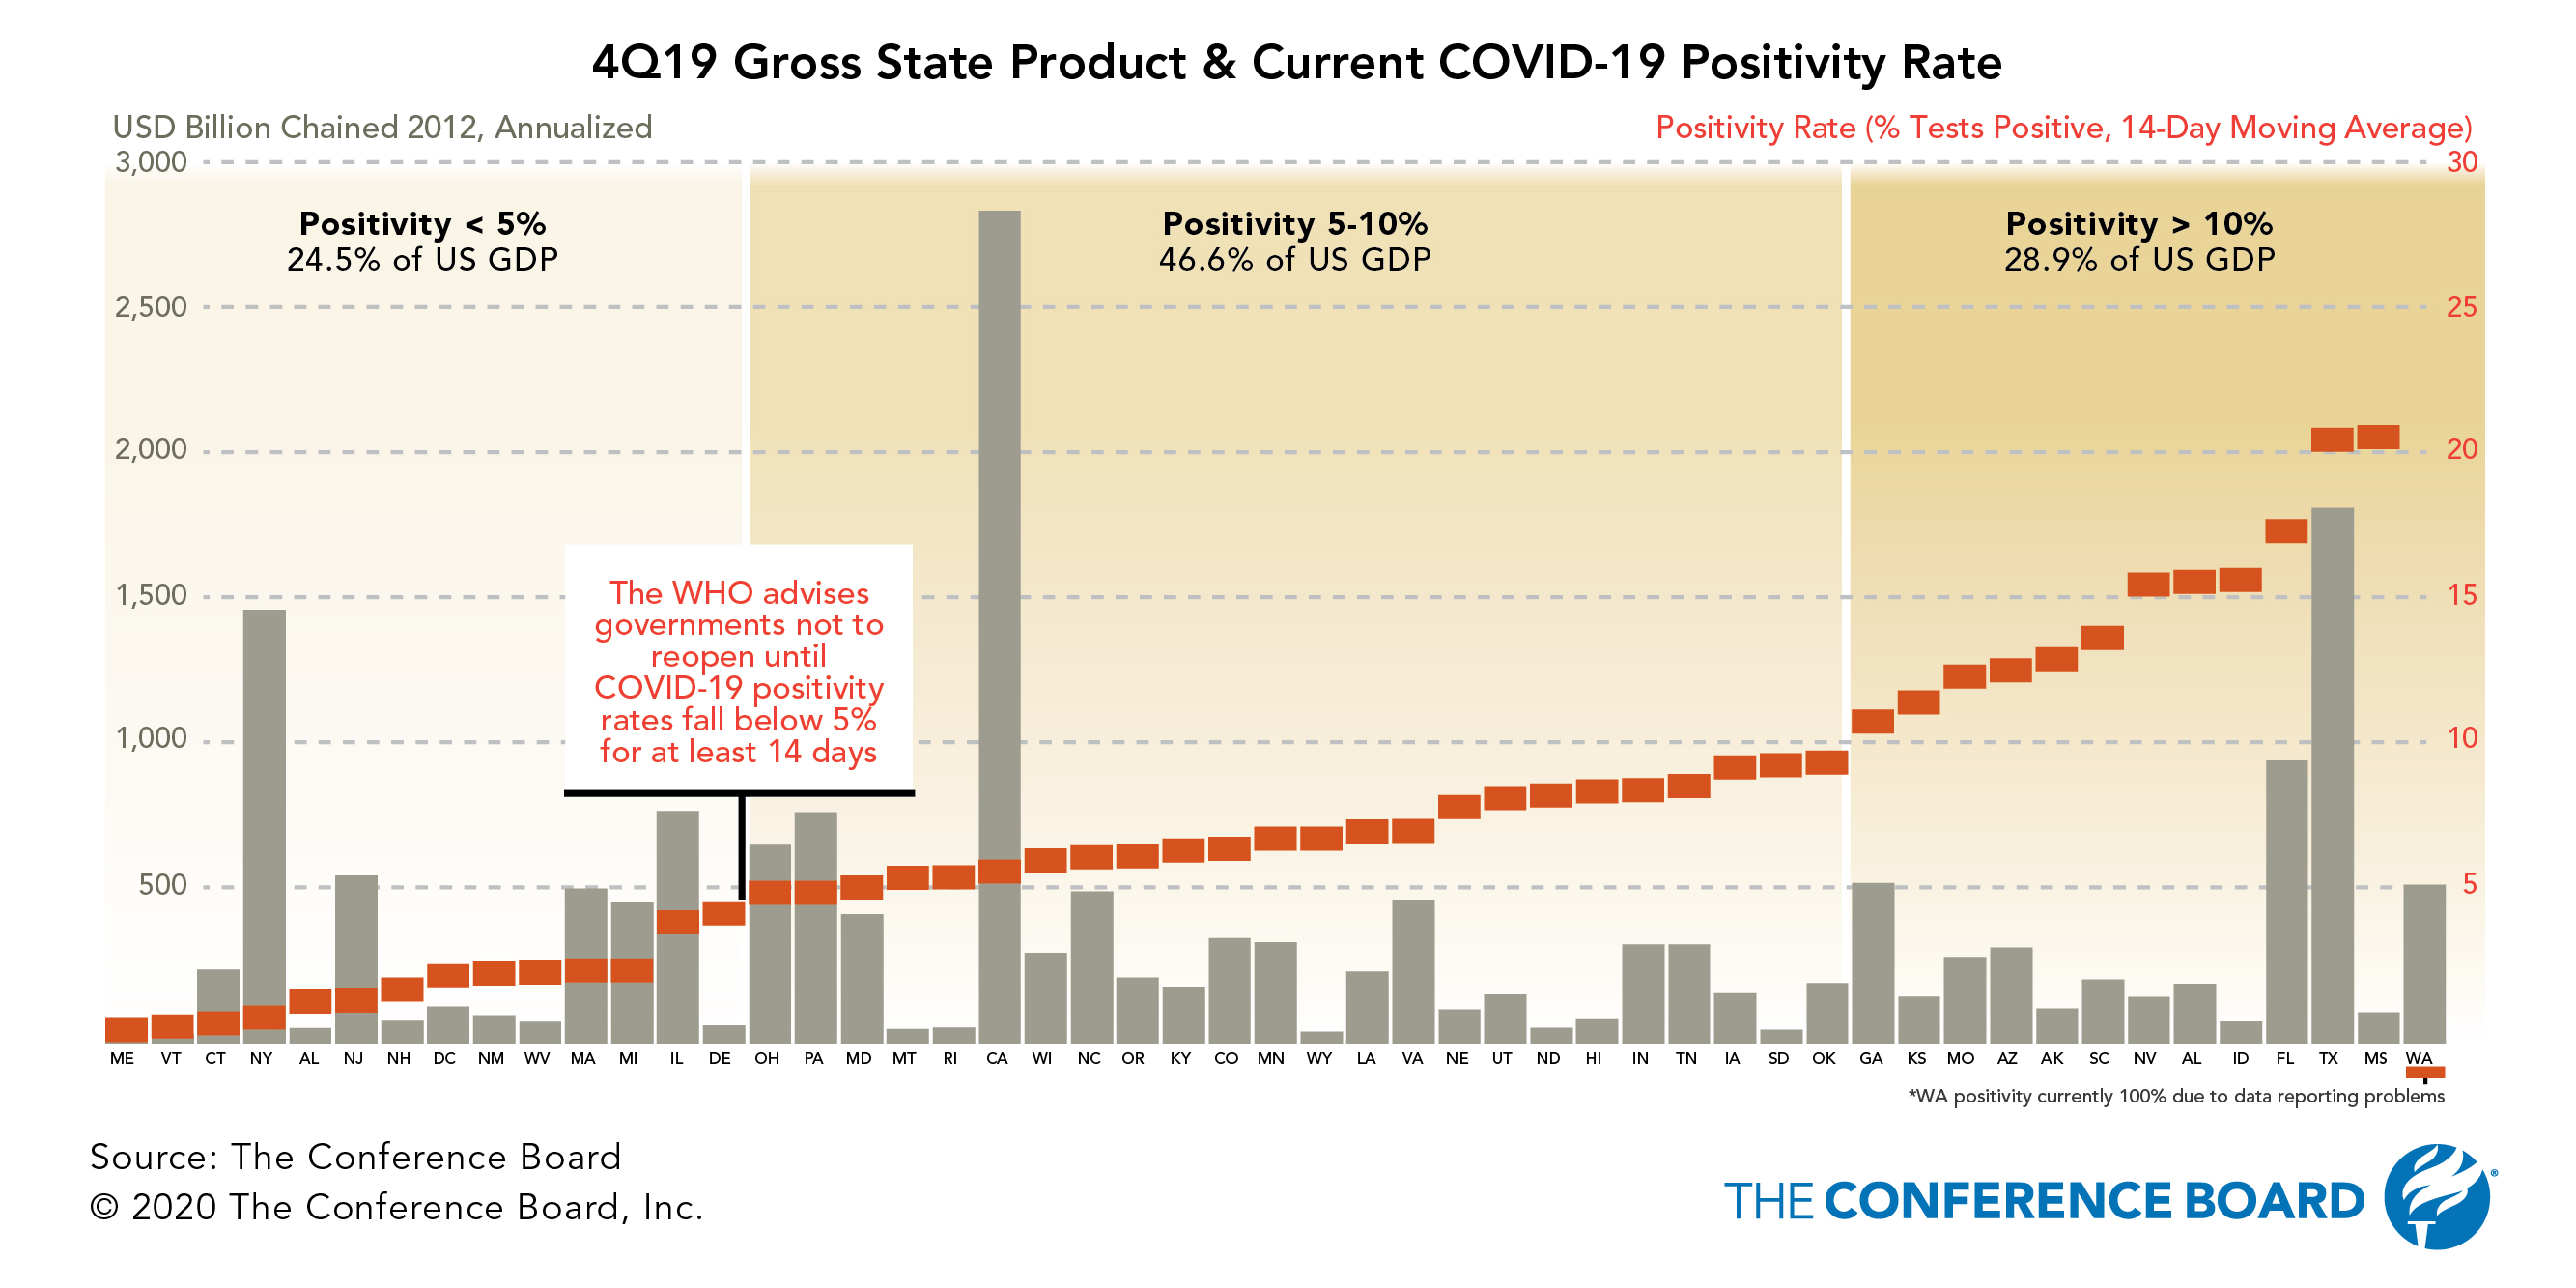 While COVID-19 is having a different impact on each state, the US economy as a whole remains at risk